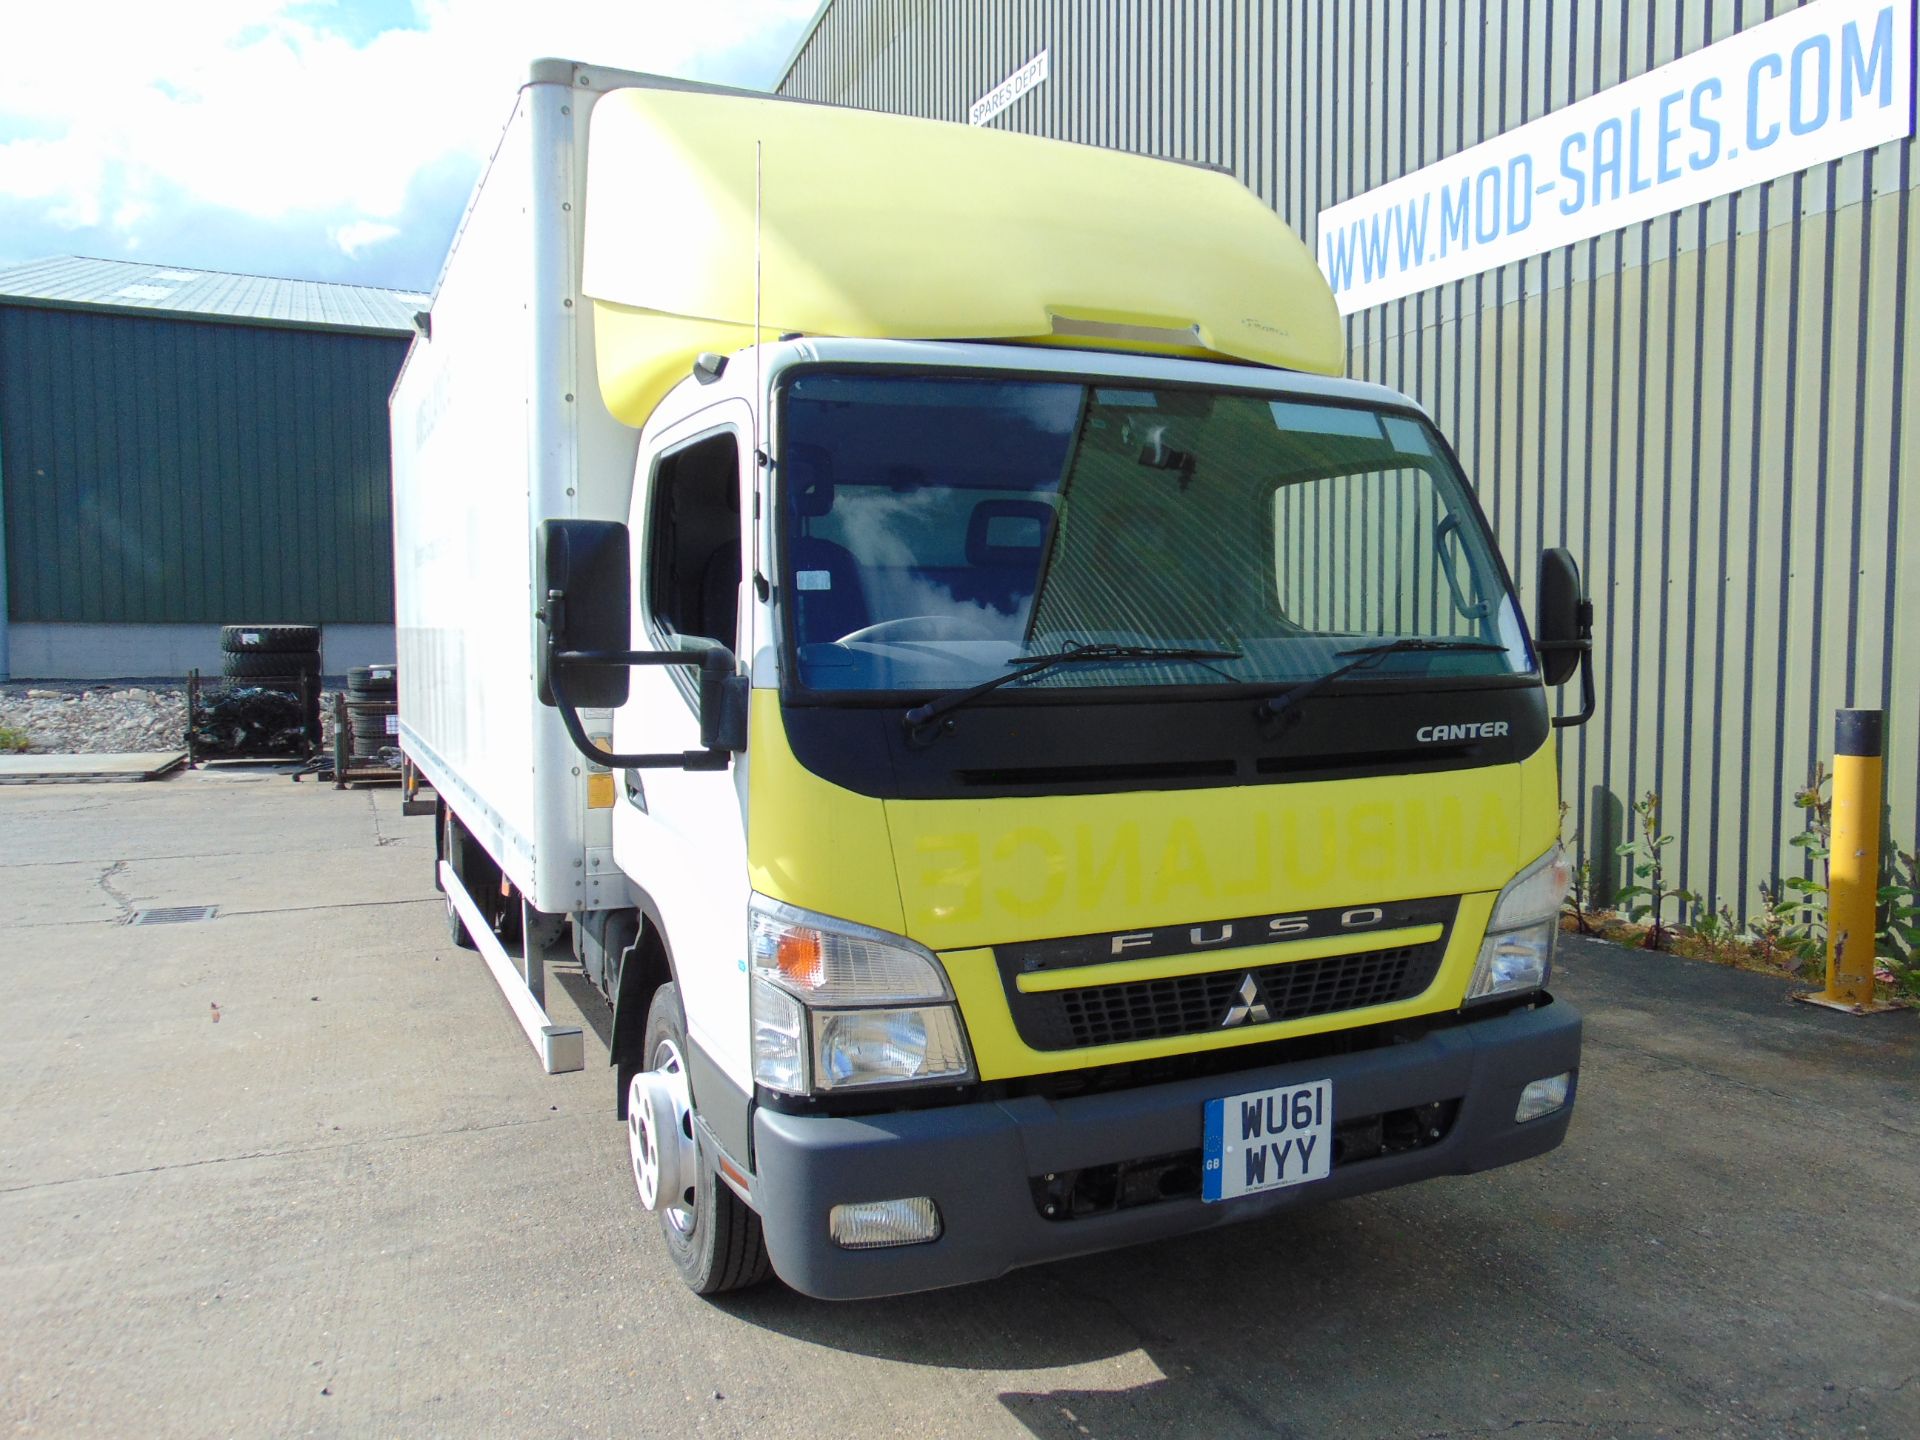 2011 Mitsubishi Fuso Canter Box lorry 7.5T - Only 5400 Miles! - Image 15 of 51